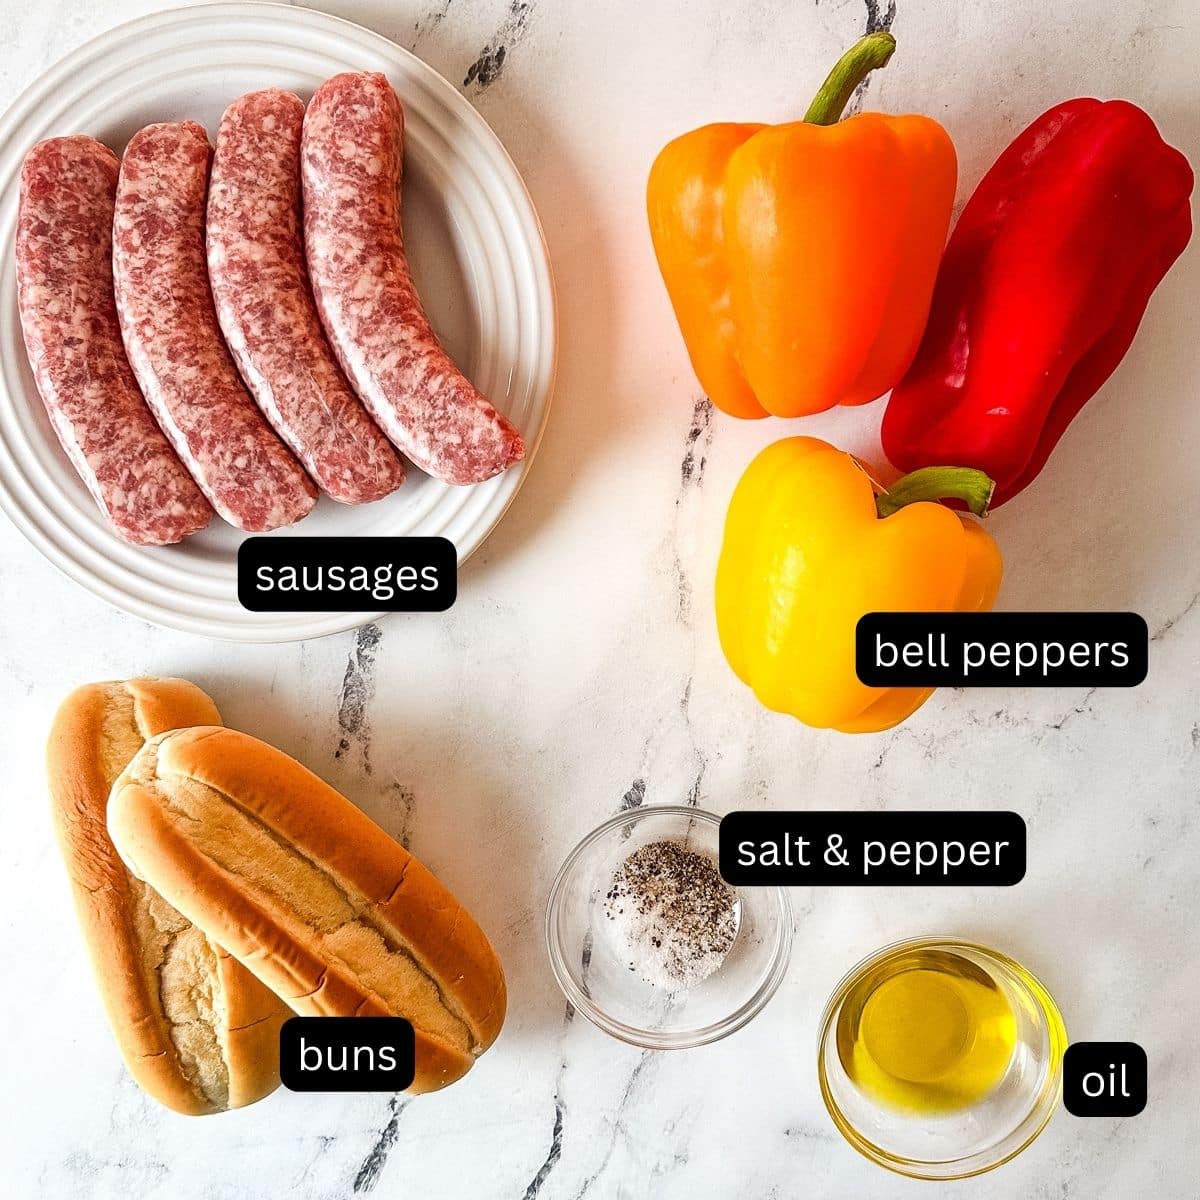 The labeled ingredients for sausage and pepper sandwiches on a white marble counter.